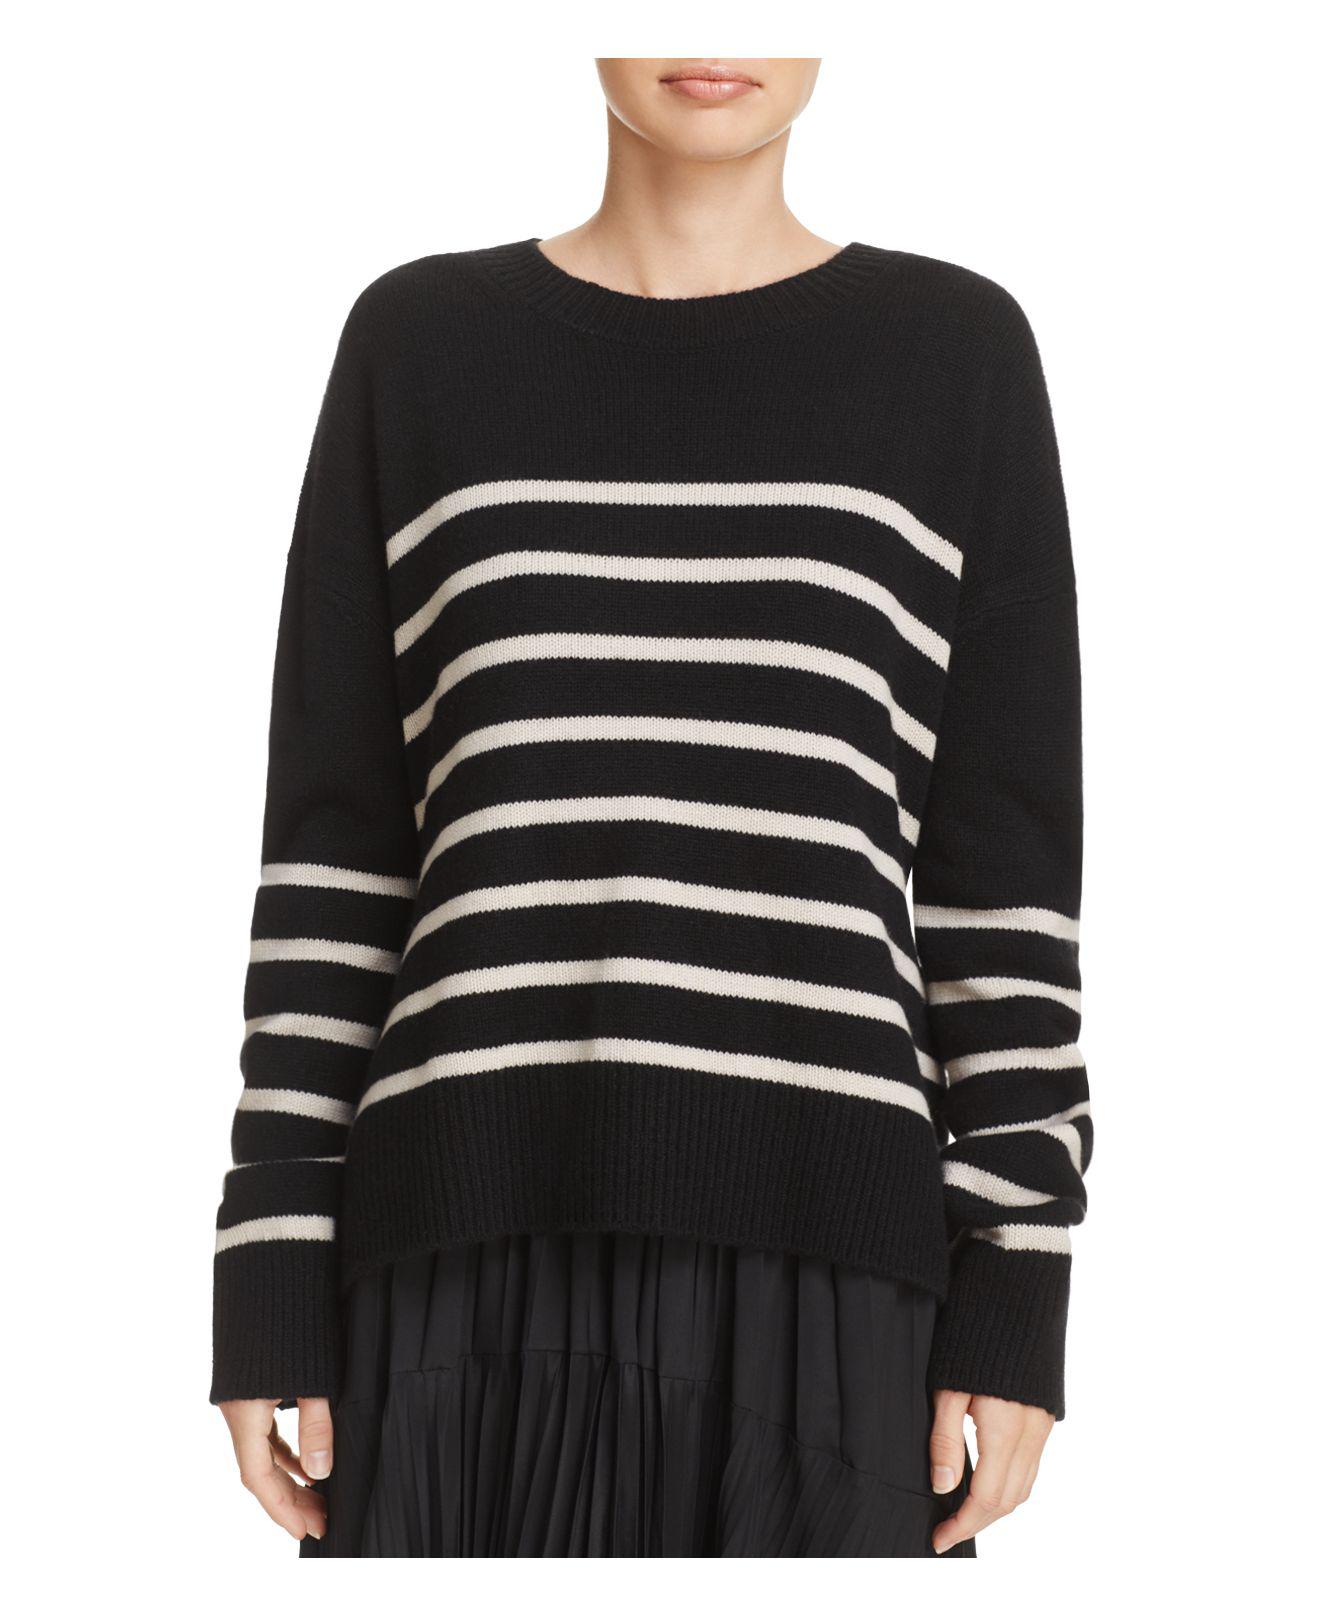 Lyst - Vince Tie-back Cashmere Sweater in Black